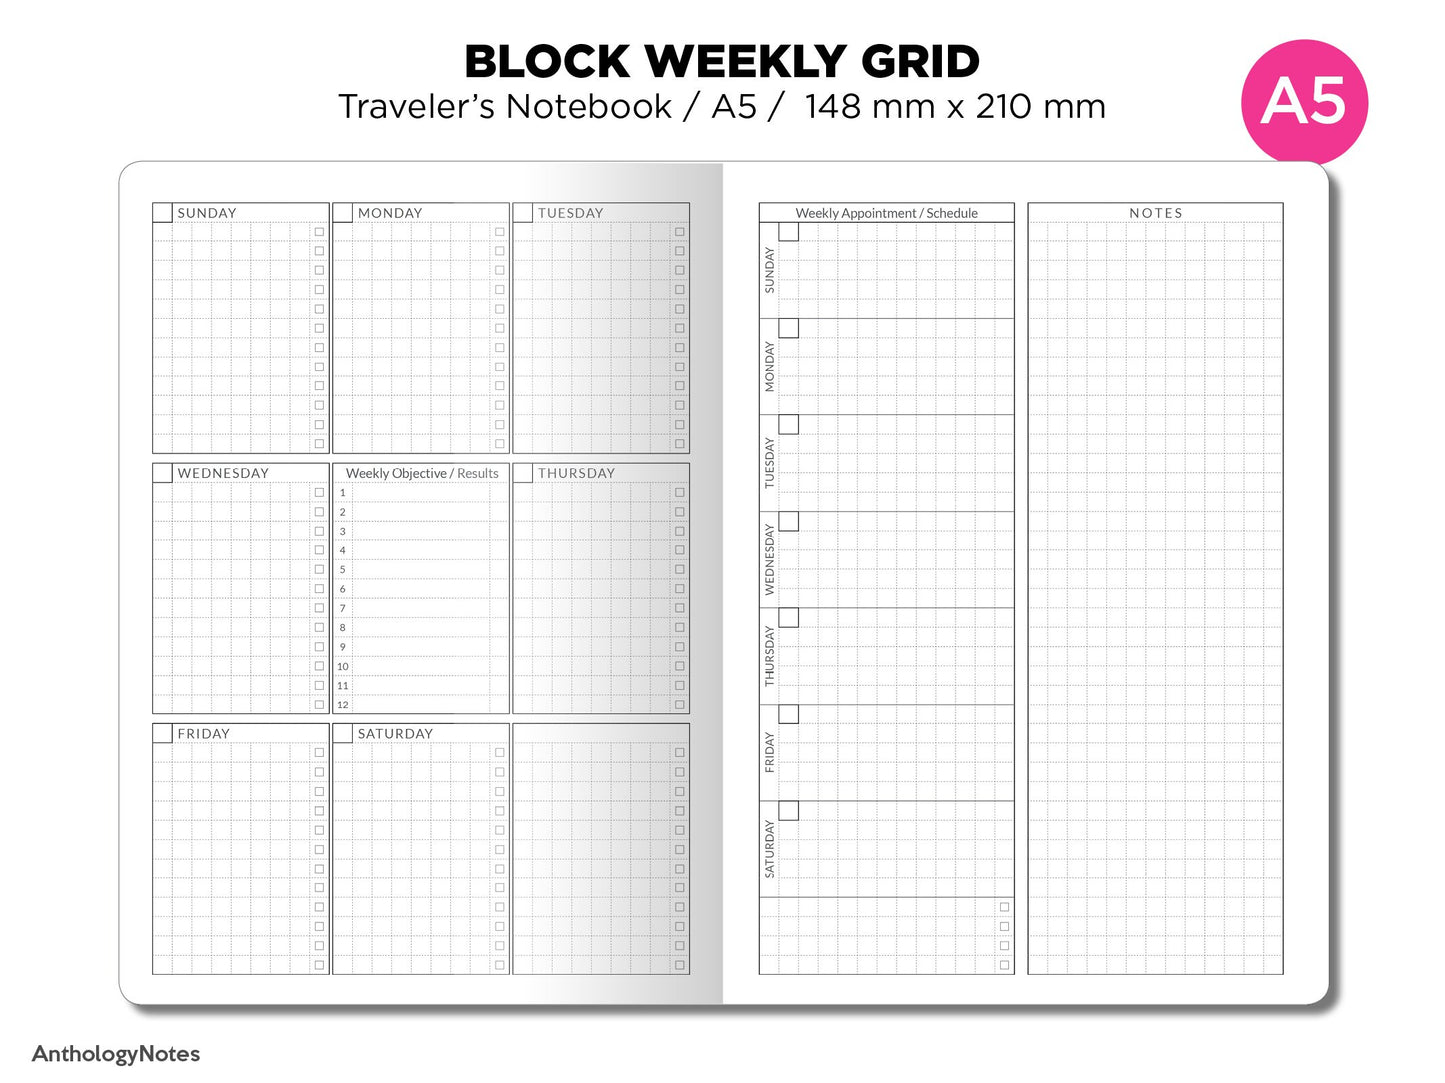 TN A5 Unique Weekly BLOCK GRID Printable Traveler's Notebook Insert